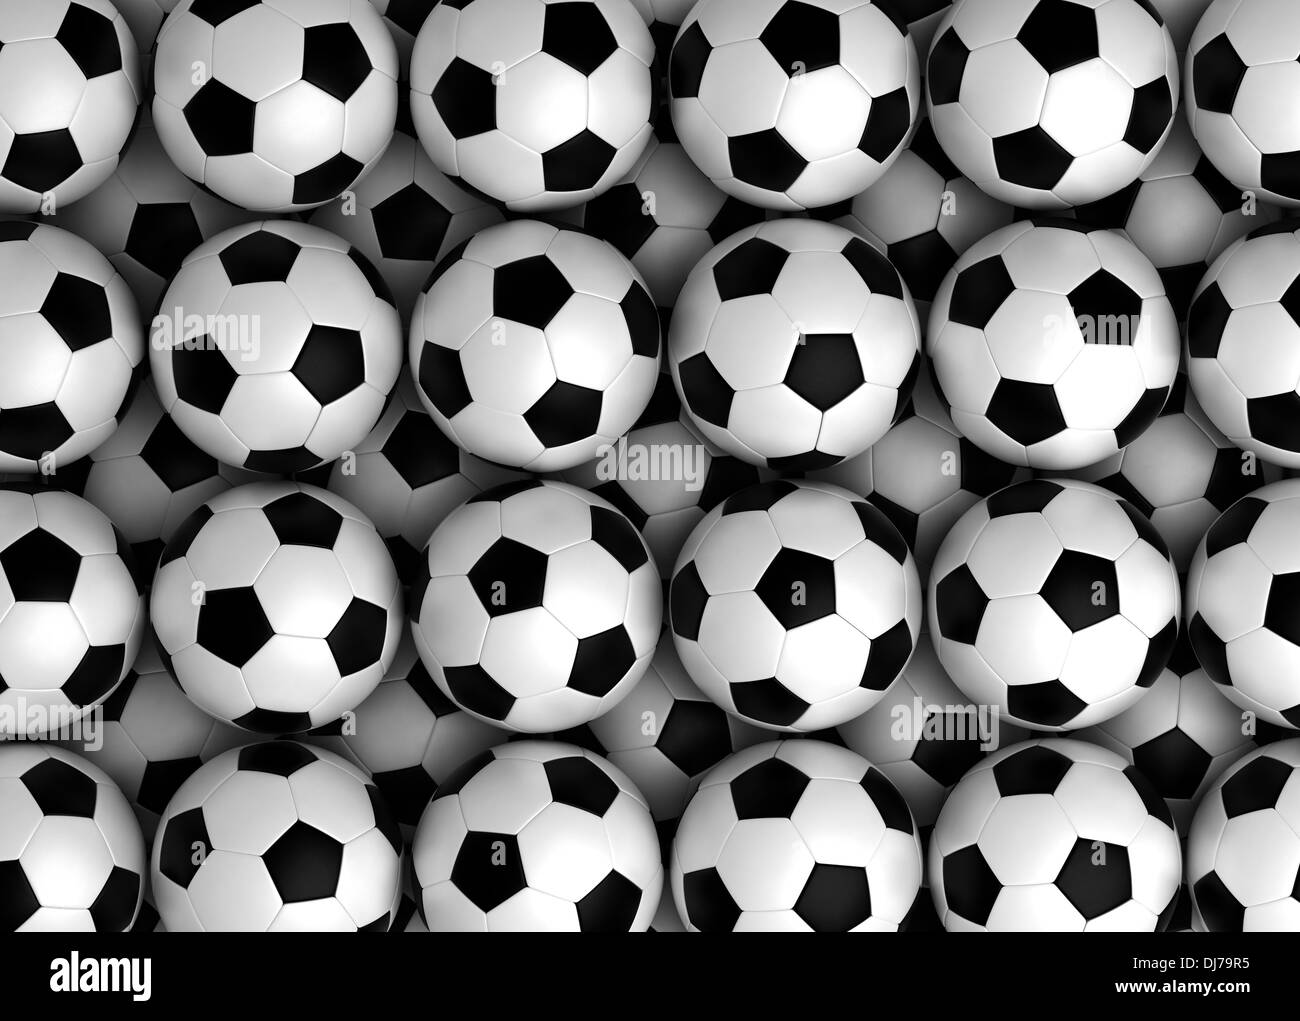 Background with soccer balls (Computer generated image) Stock Photo